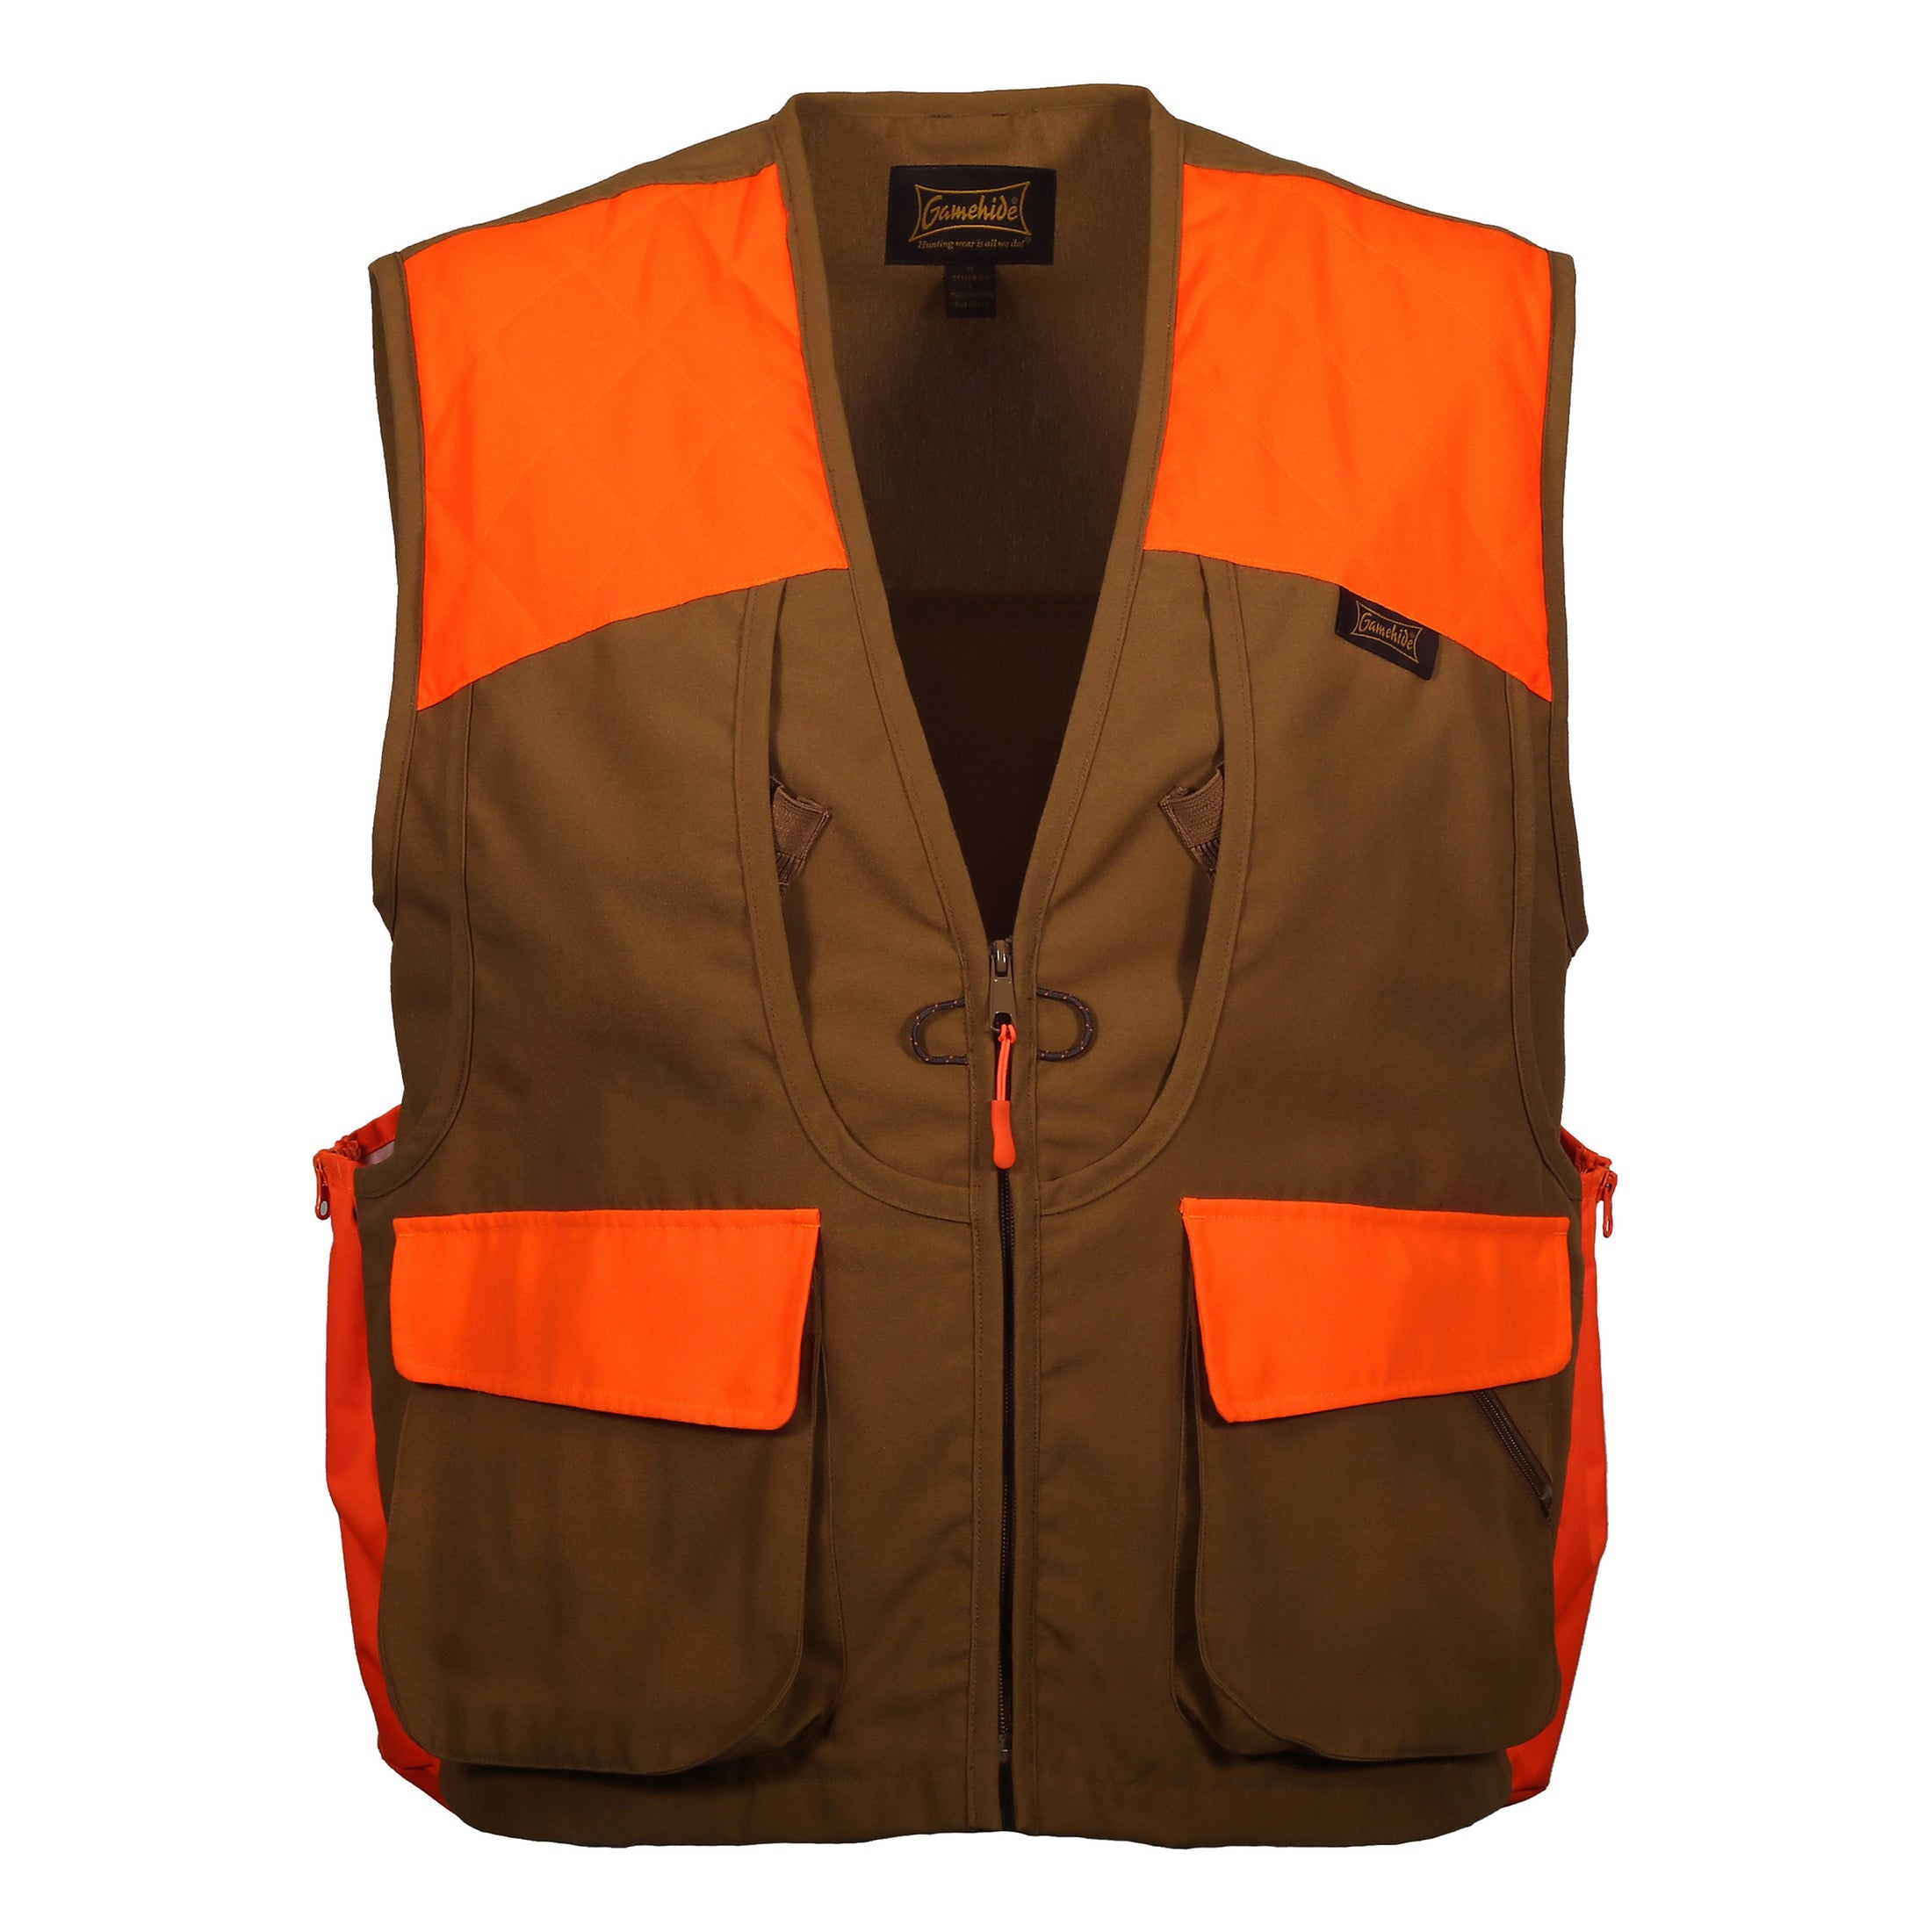 gamehide Outfitters Upland Vest front (marsh brown/orange)